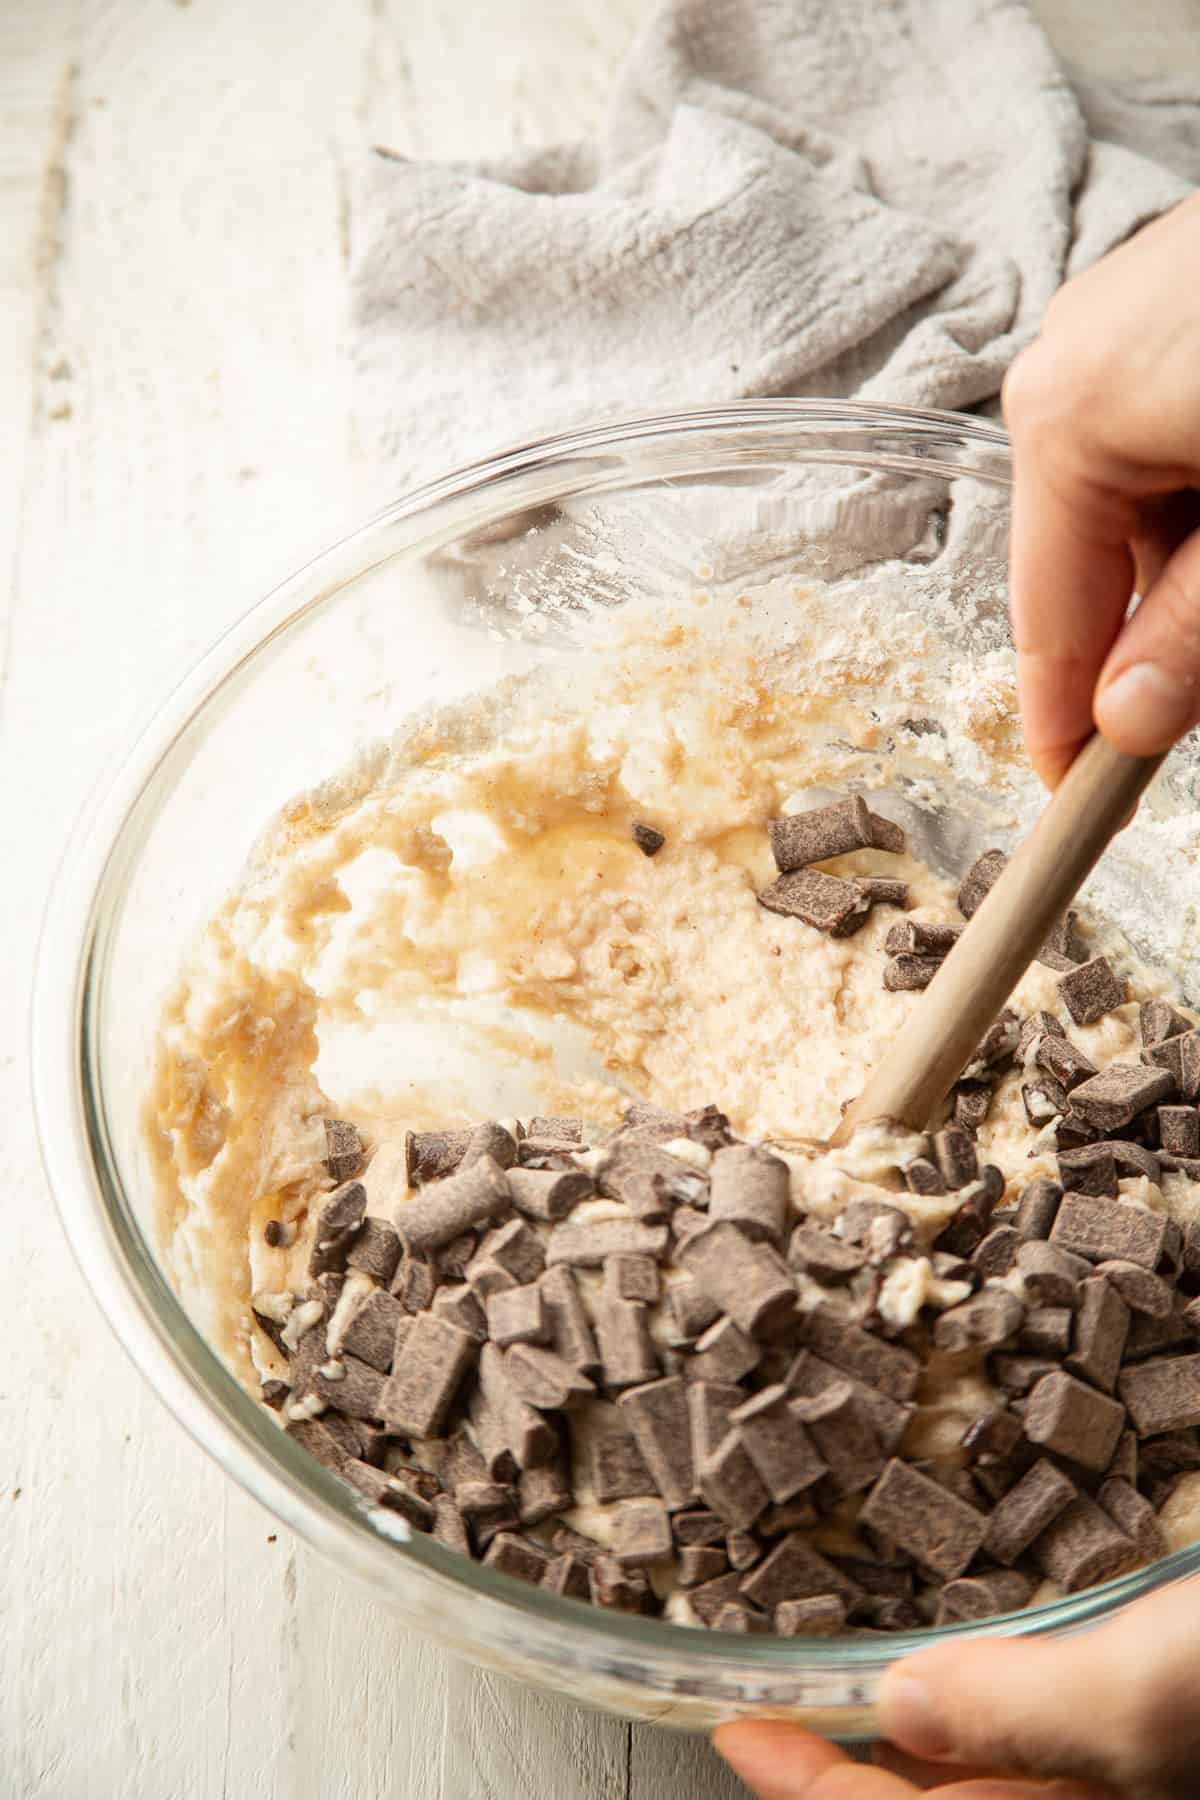 Fold the chocolate pieces by hand into a bowl of muffin batter.